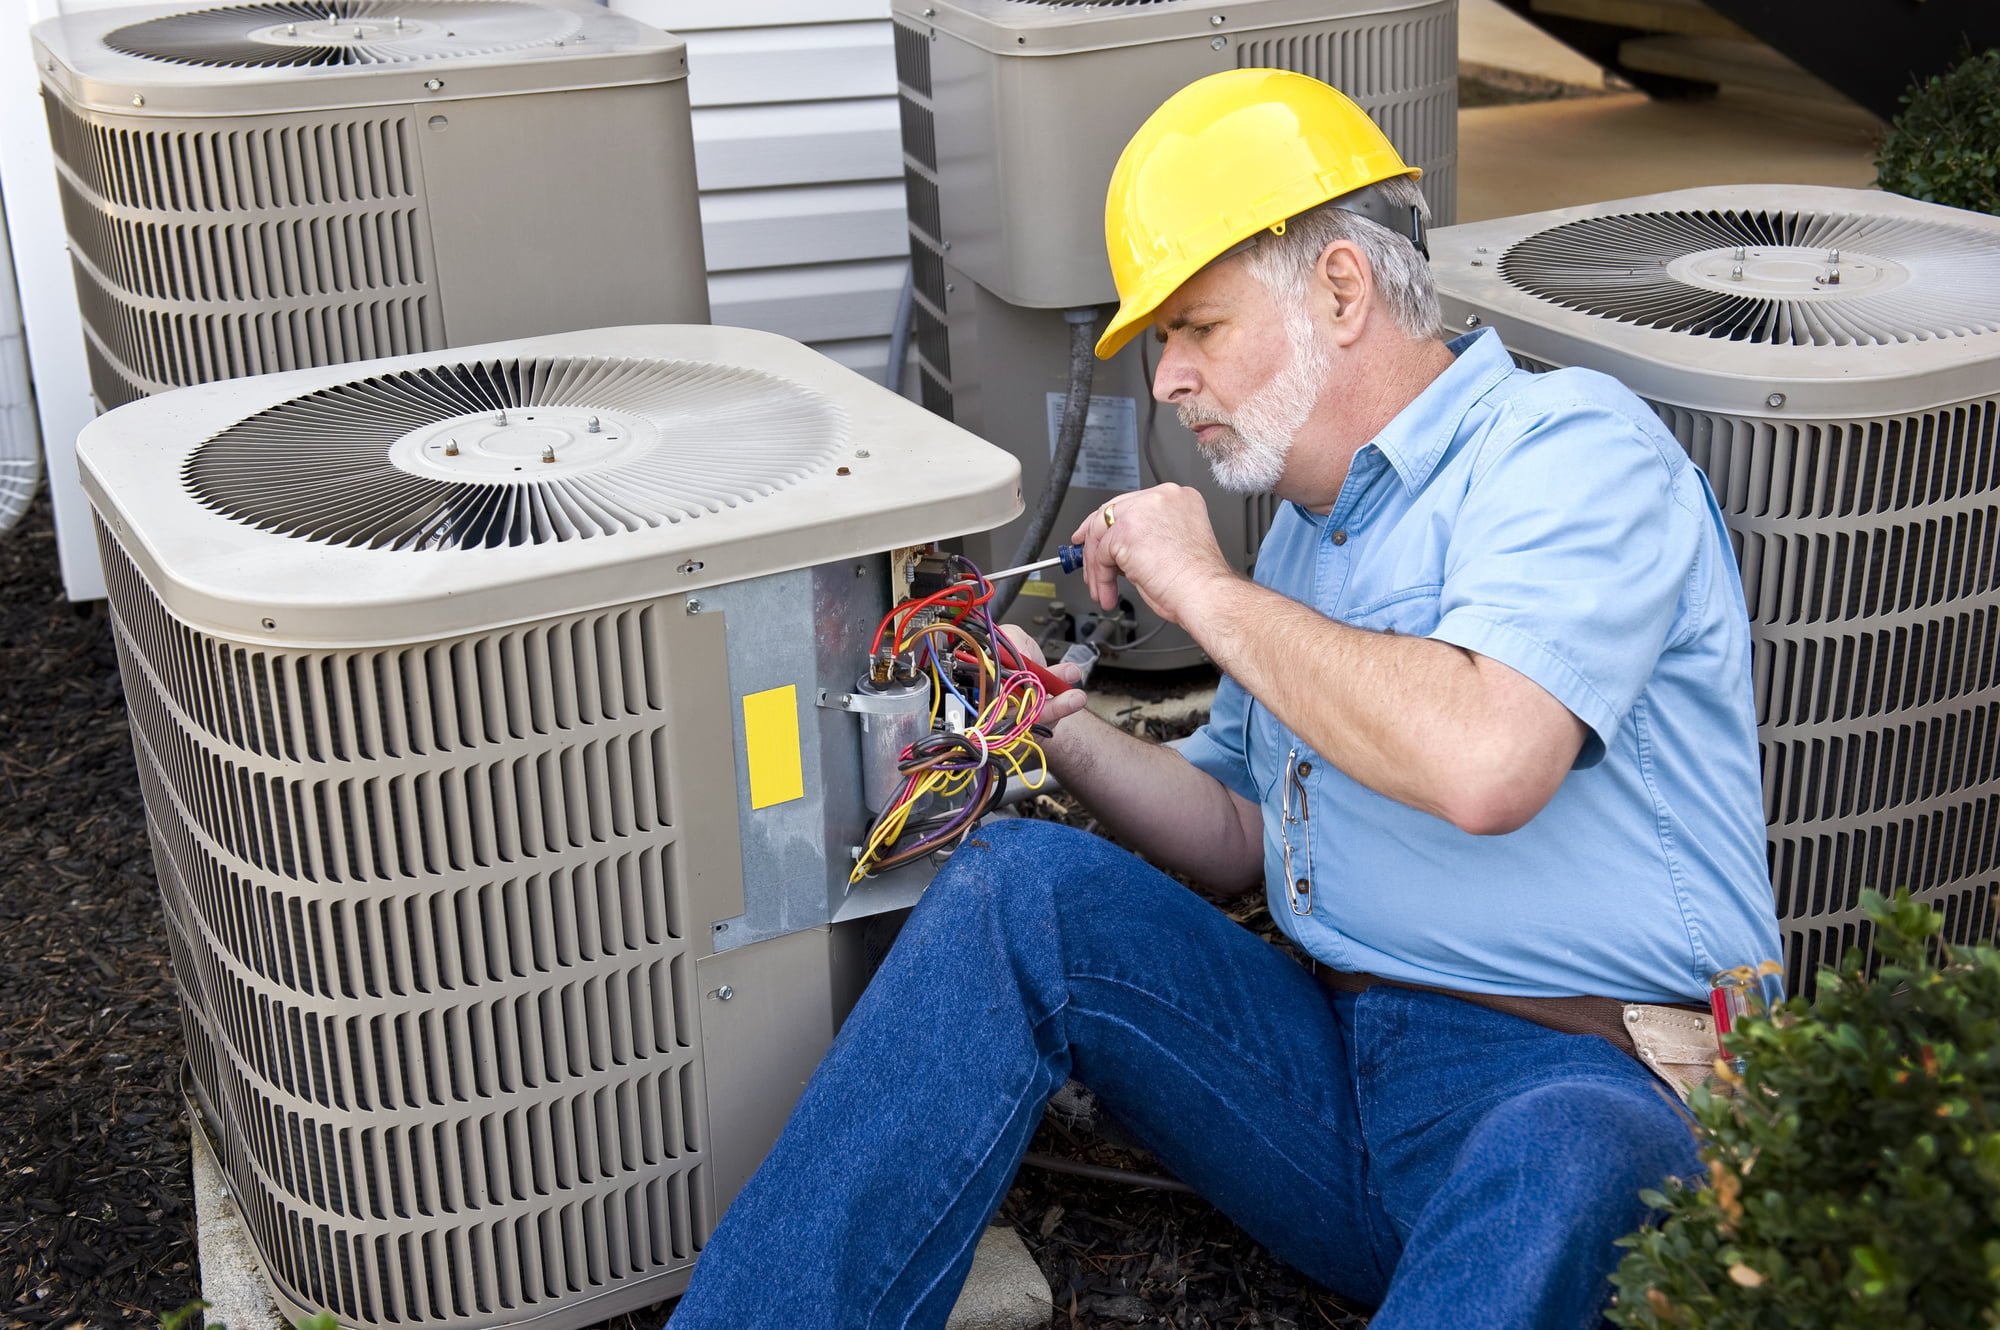 Whether it's the heat of summer or the cold of winter, you don't want your HVAC unit to go out. Watch out for these warning signs that you need HVAC repair!